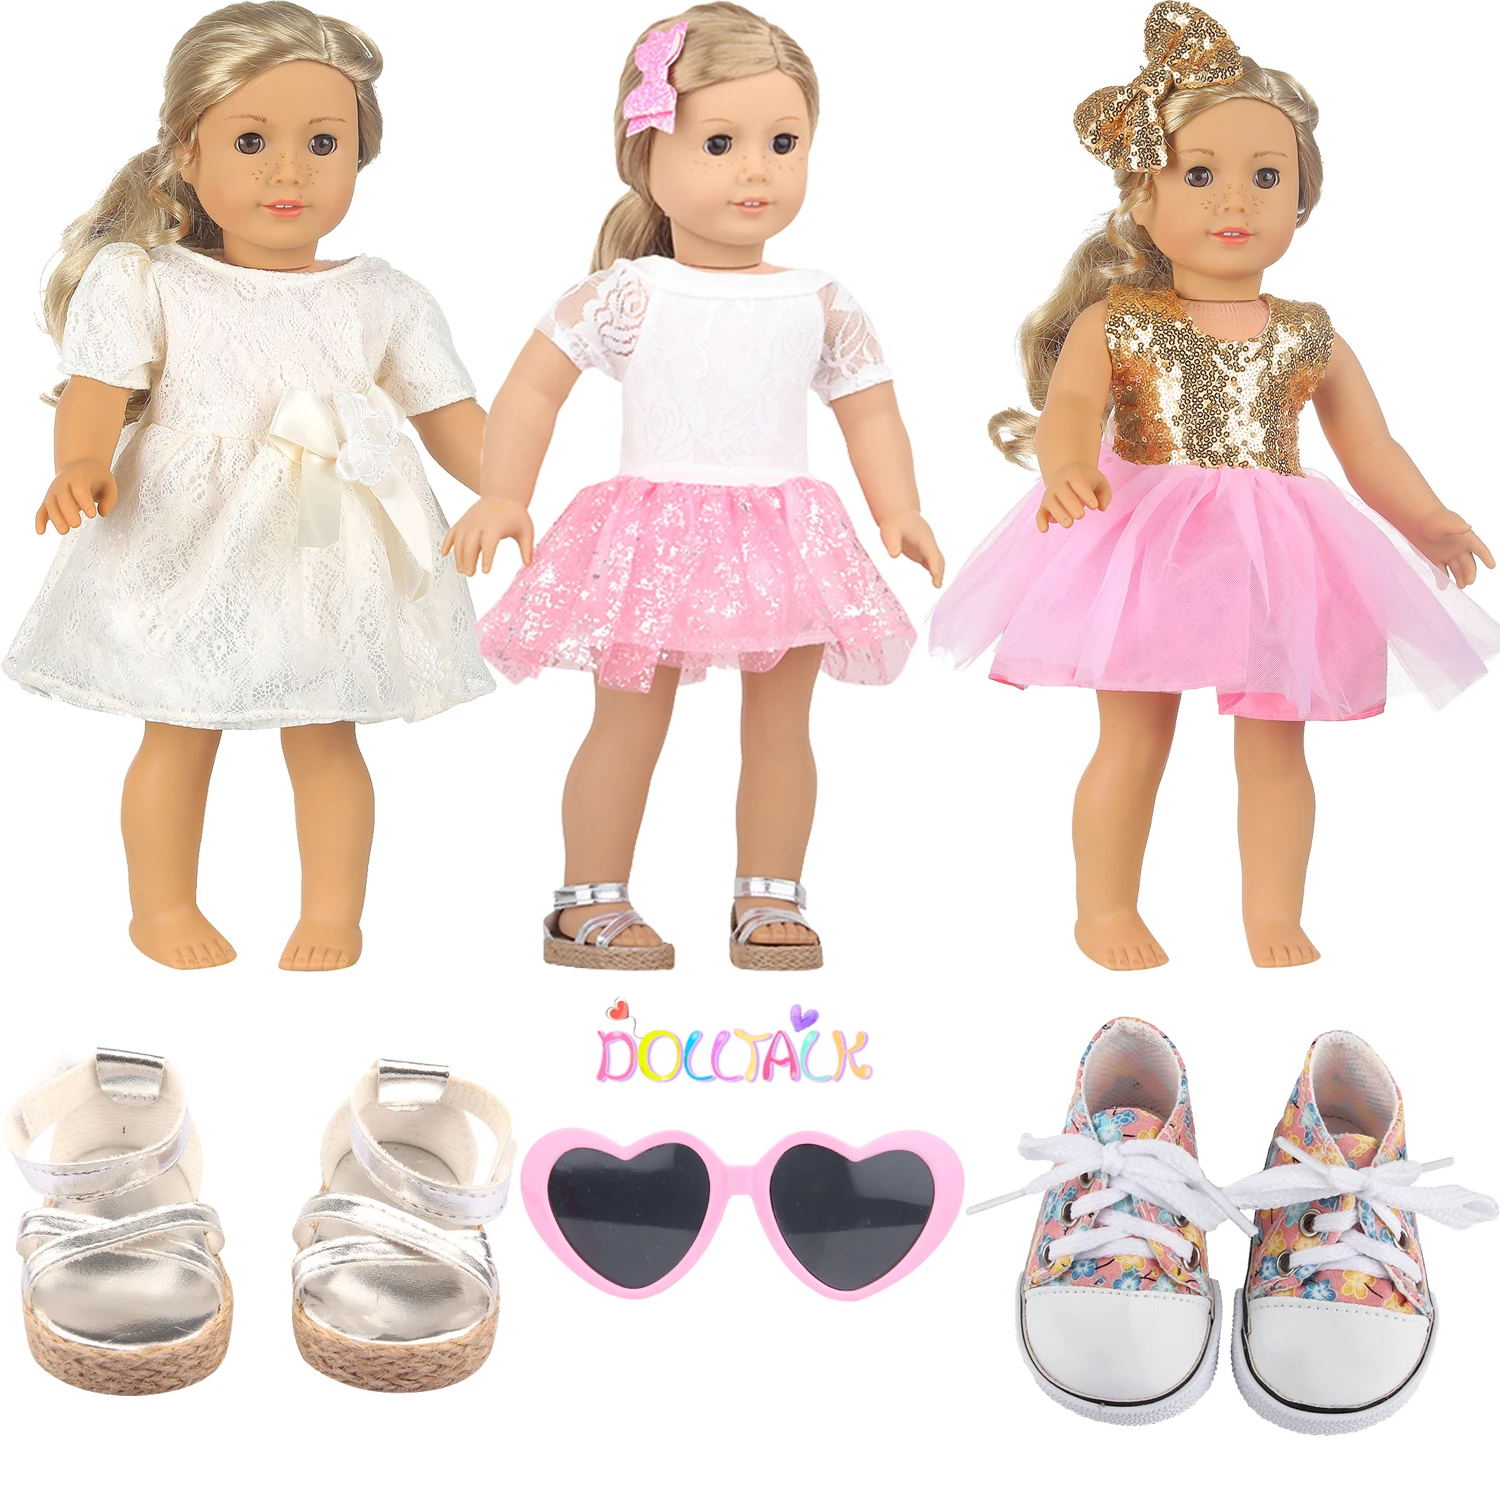 Baby Girl Doll Clothes White Rose Dress Fits 43cm&18inch Dolls with Shoes Free 